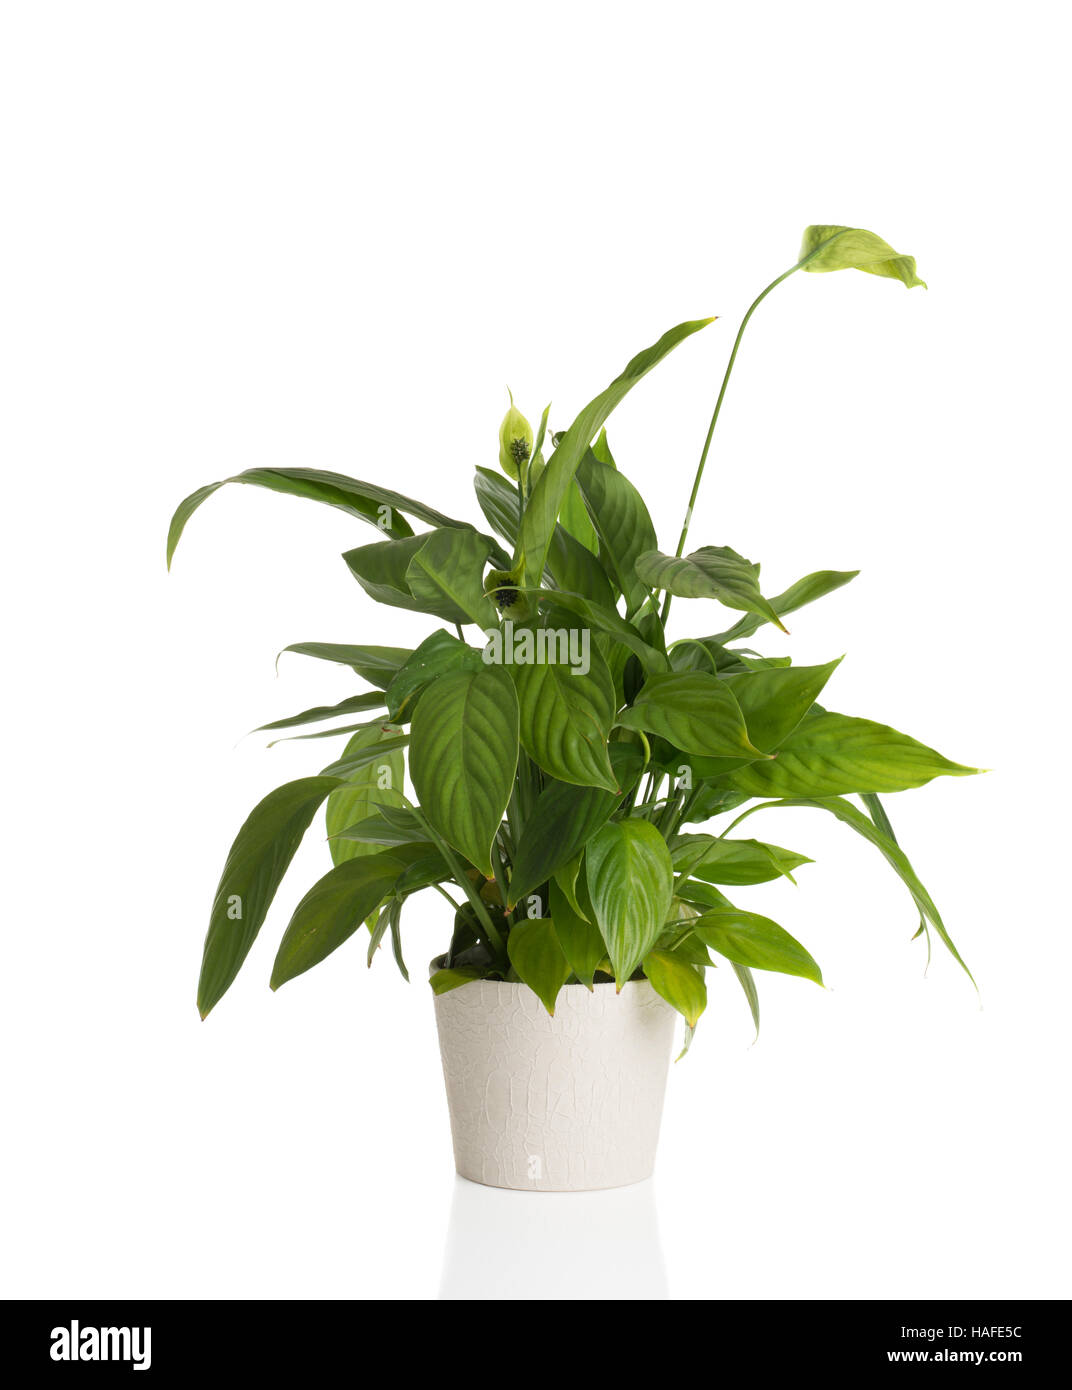 High resolution image of an African Peace Lily on a white background Stock Photo